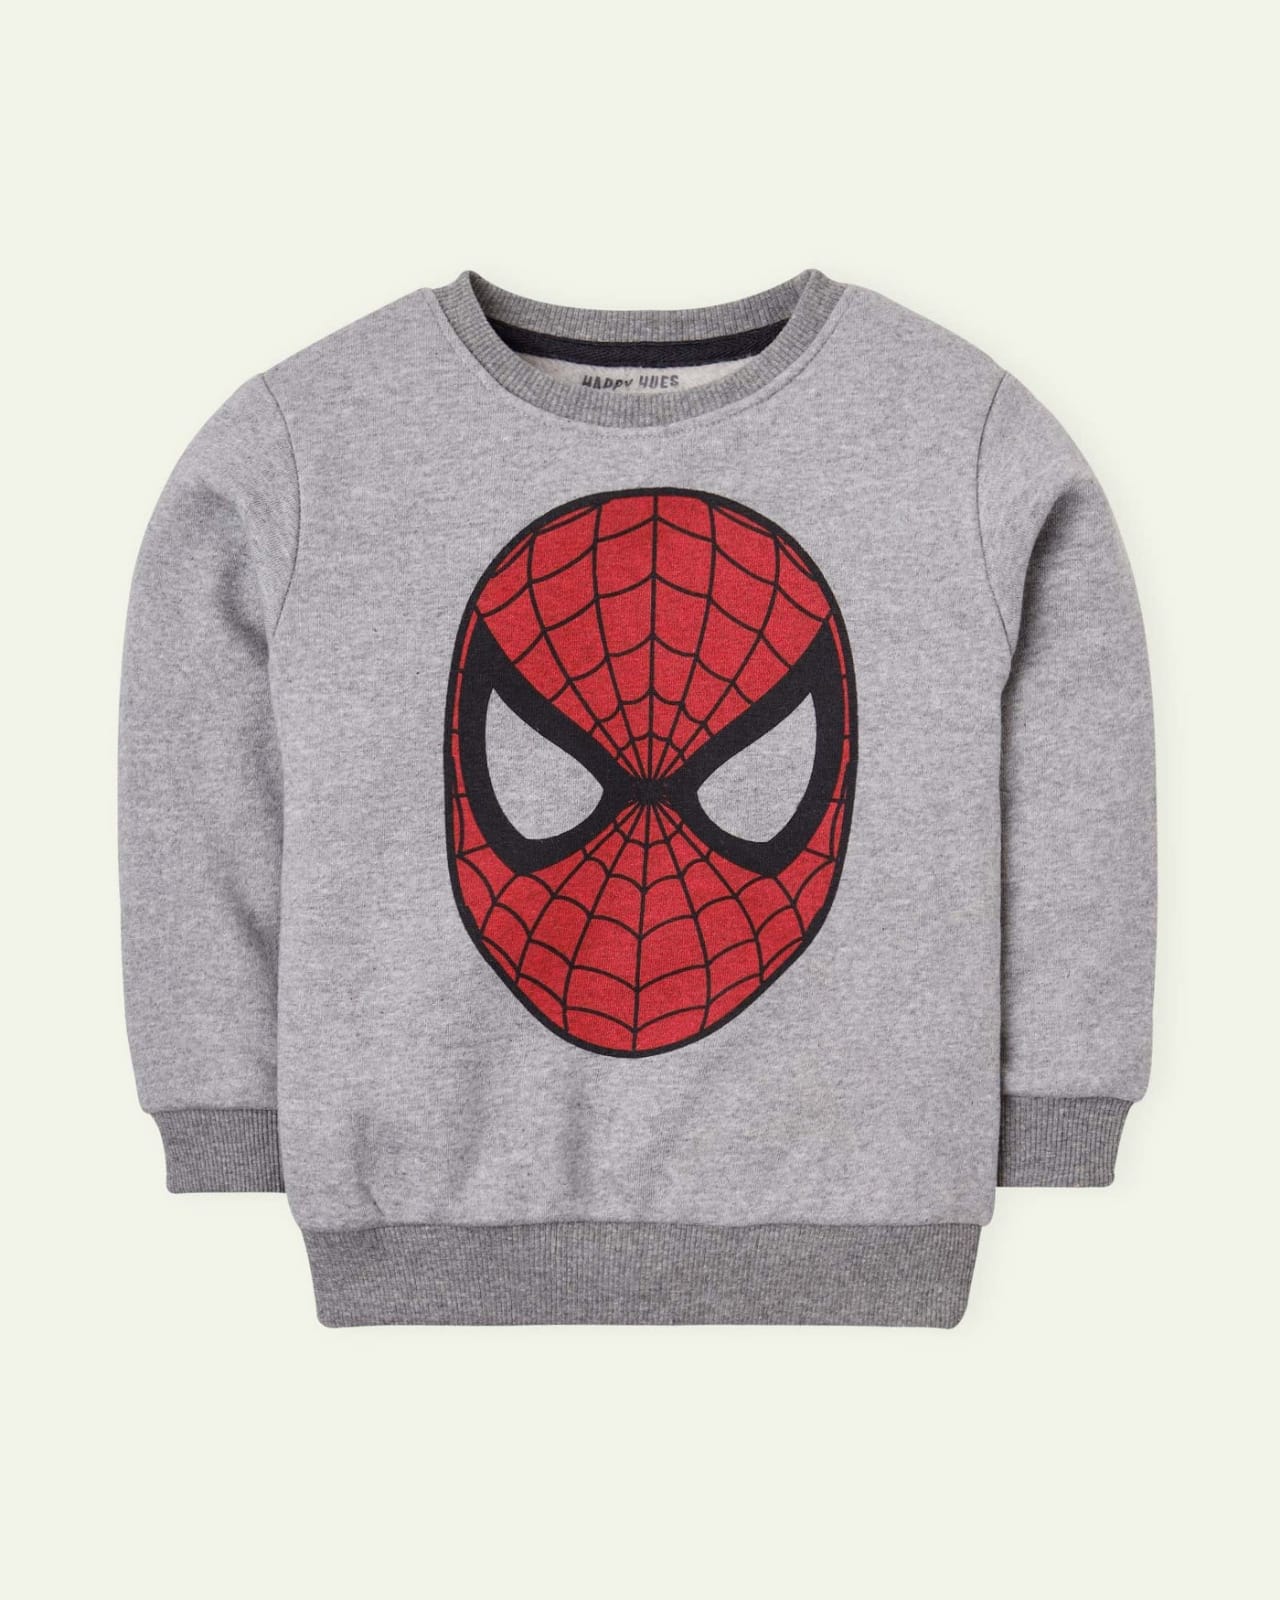 Spider Sweatshirts - Comfort, Style, and Pop Culture Flair